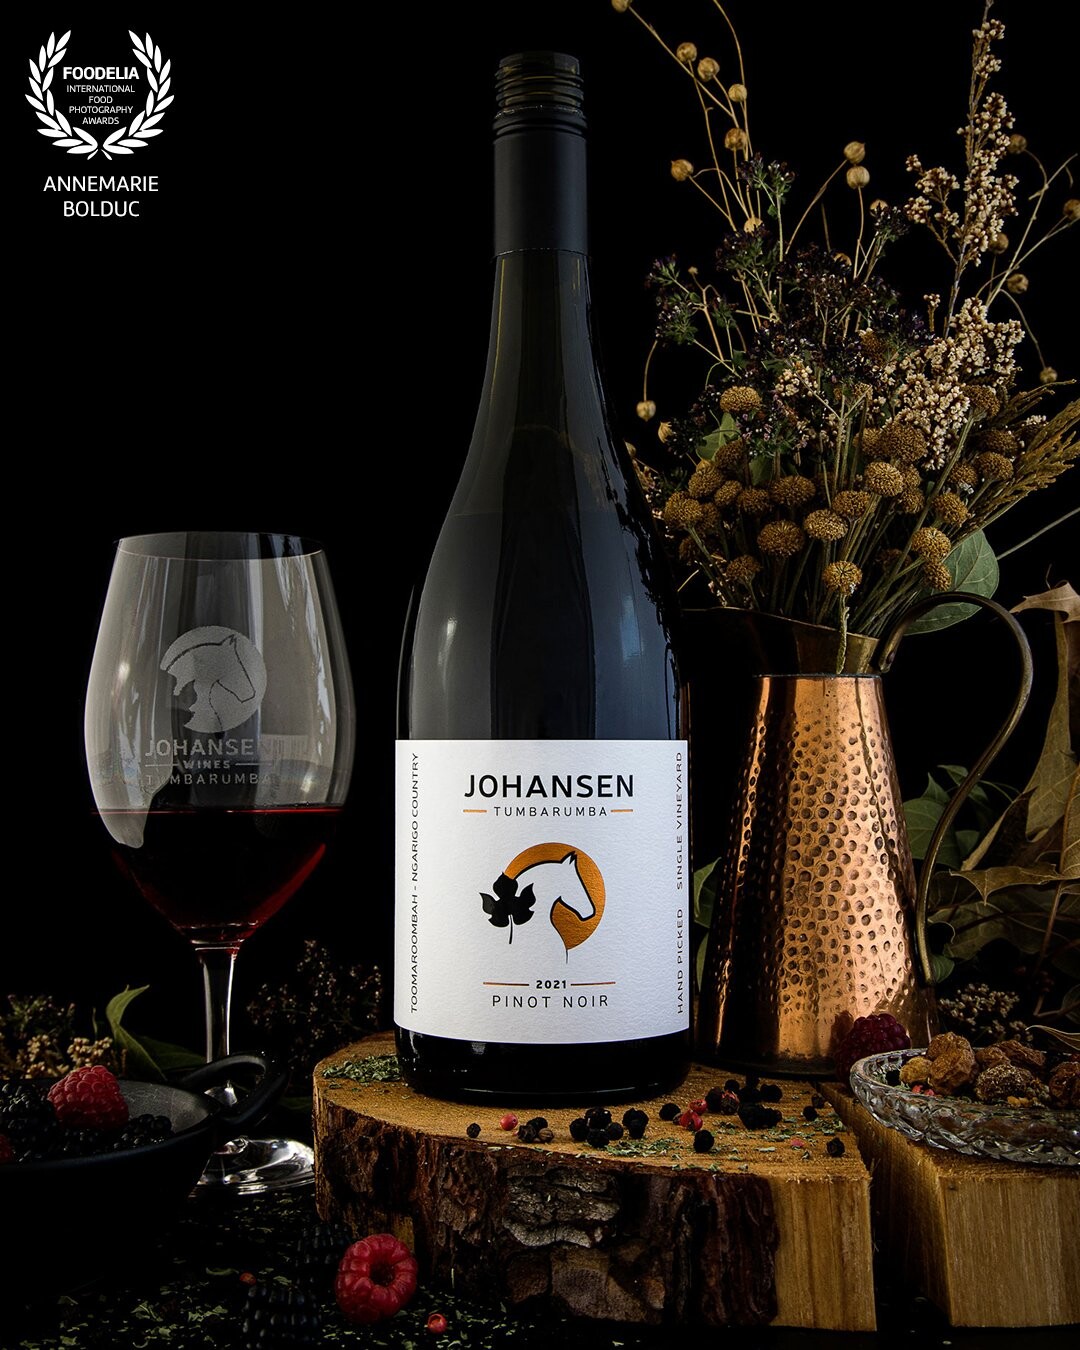 From the label design, styling and photography, this commissioned work was made at my home studio with natural light, perishable props from the garden and a sugar pine log slice from a burnt forest. This local client was celebrating the first vintage since the Black Summer 2019-2020 bushfires, which devastated a fair part of their vineyard. I wanted to express the resilience that emerged from the darkness in this contrast.